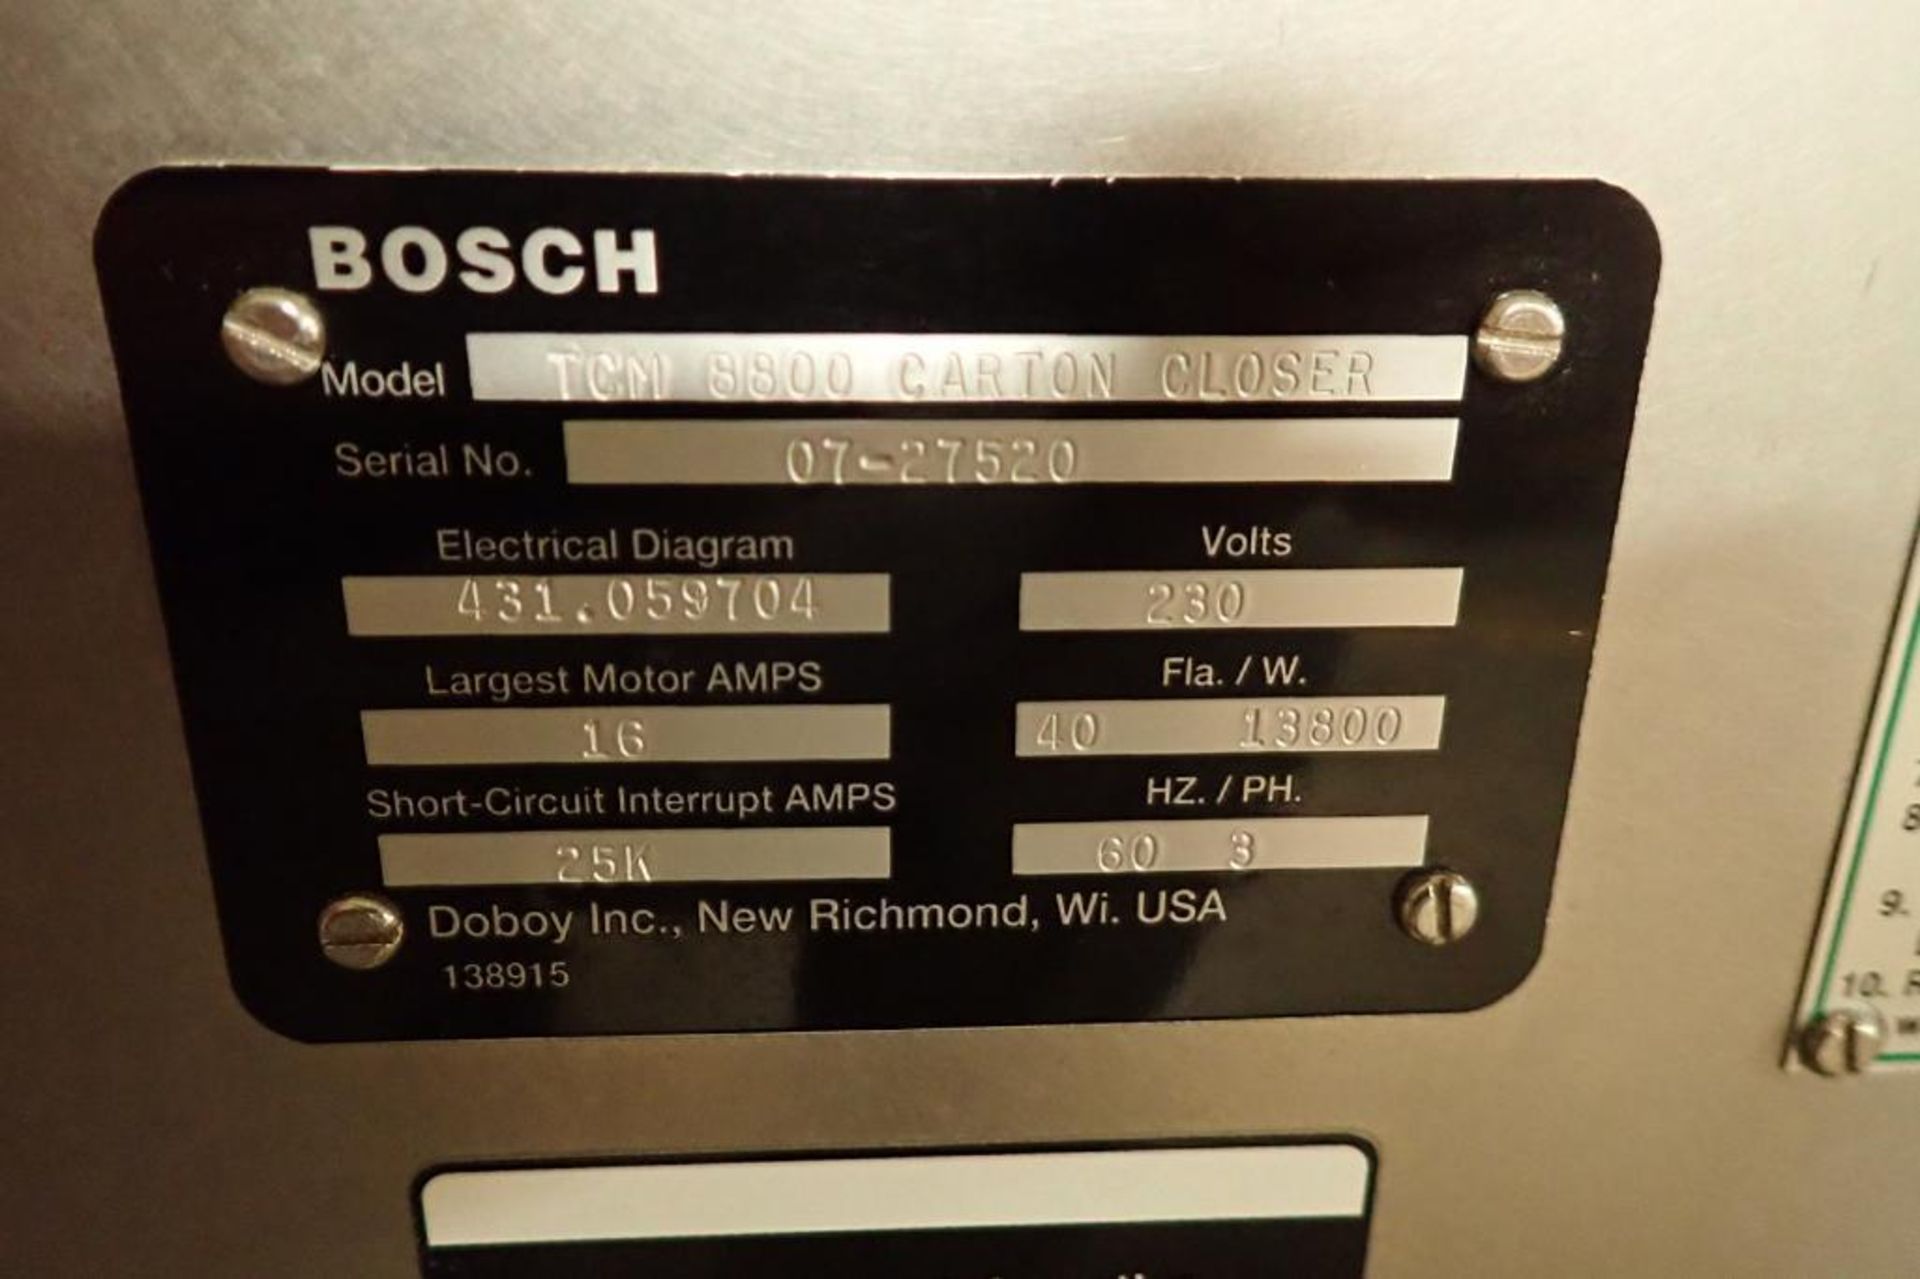 Bosch Doboy TCM 8800 carton closer {Located in Indianapolis, IN} - Image 18 of 19